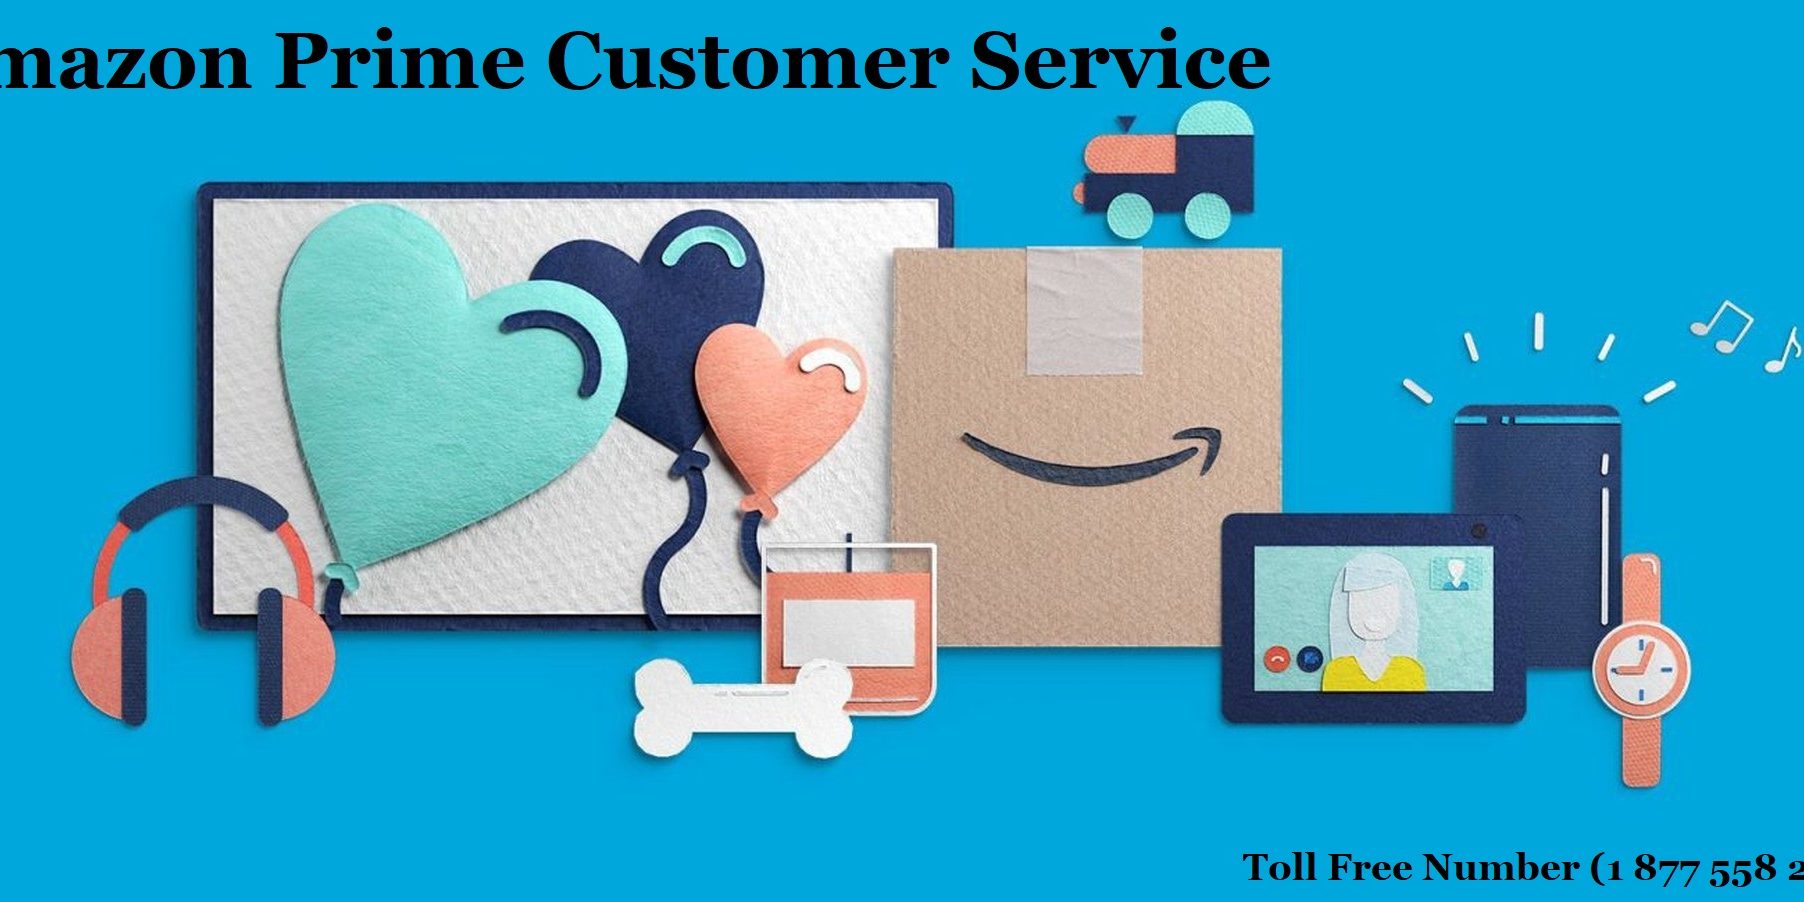 Amazon Prime Customer Service Number 1 800 Toll Free Phone Number